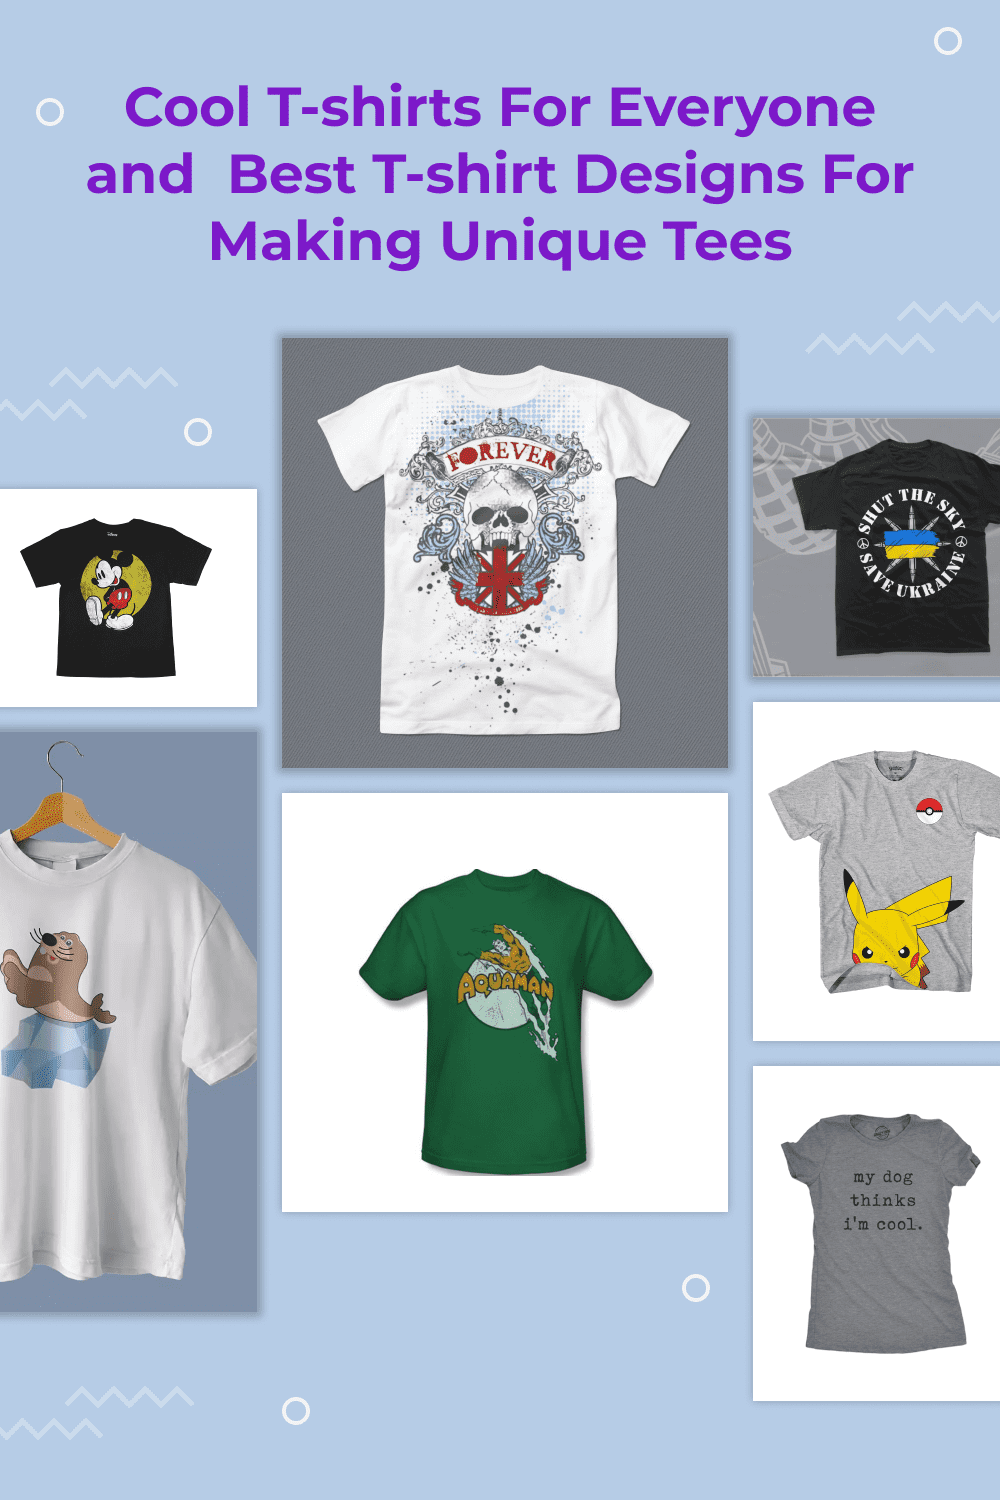 105+ Cool T-shirts For Everyone in 2022 and 45+ Best T-shirt Designs For Making Unique Tees.